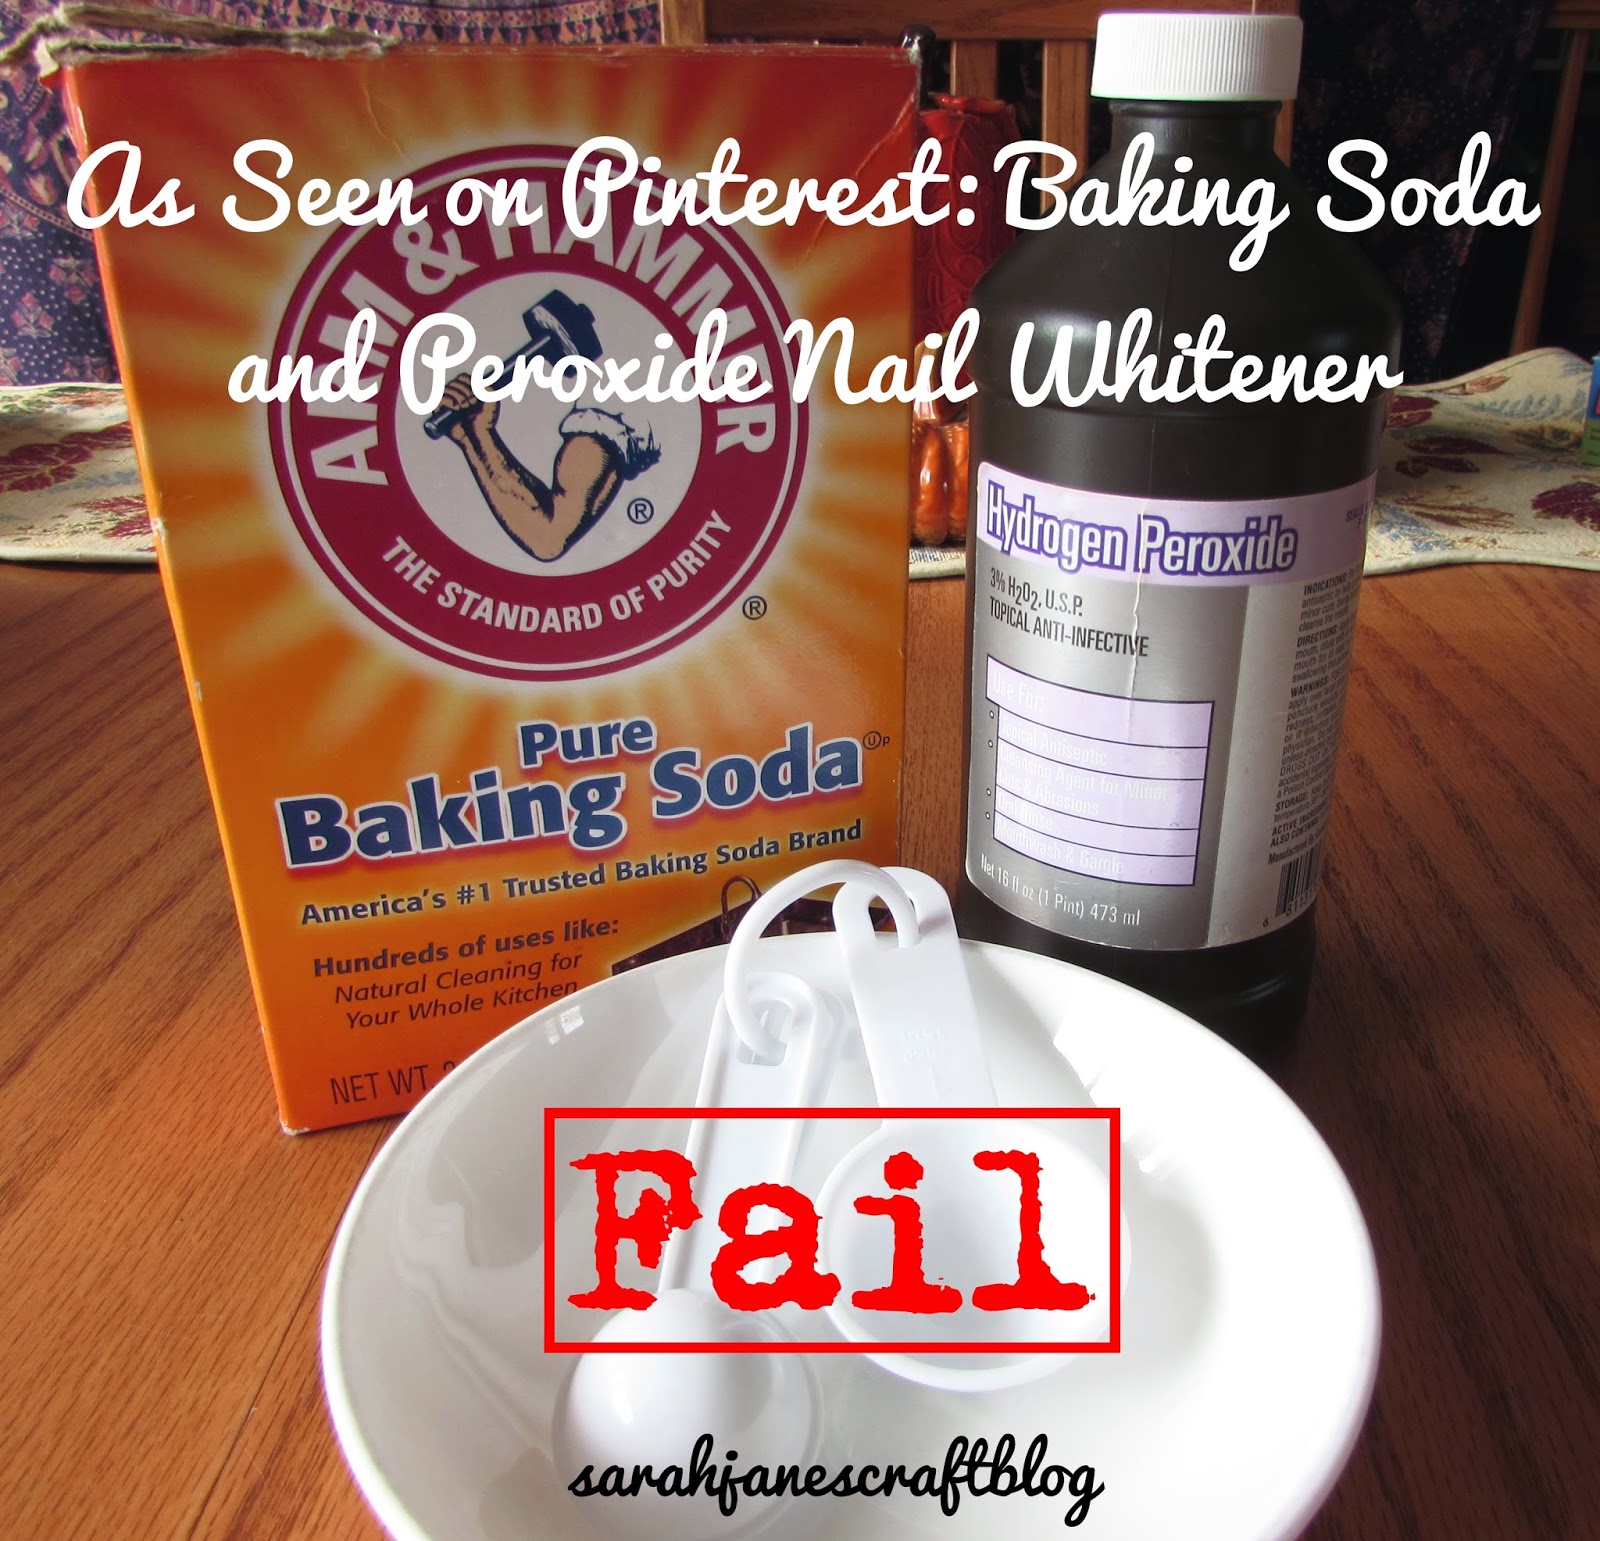 As Seen on Pinterest: Baking Soda and Peroxide Nail Whitener